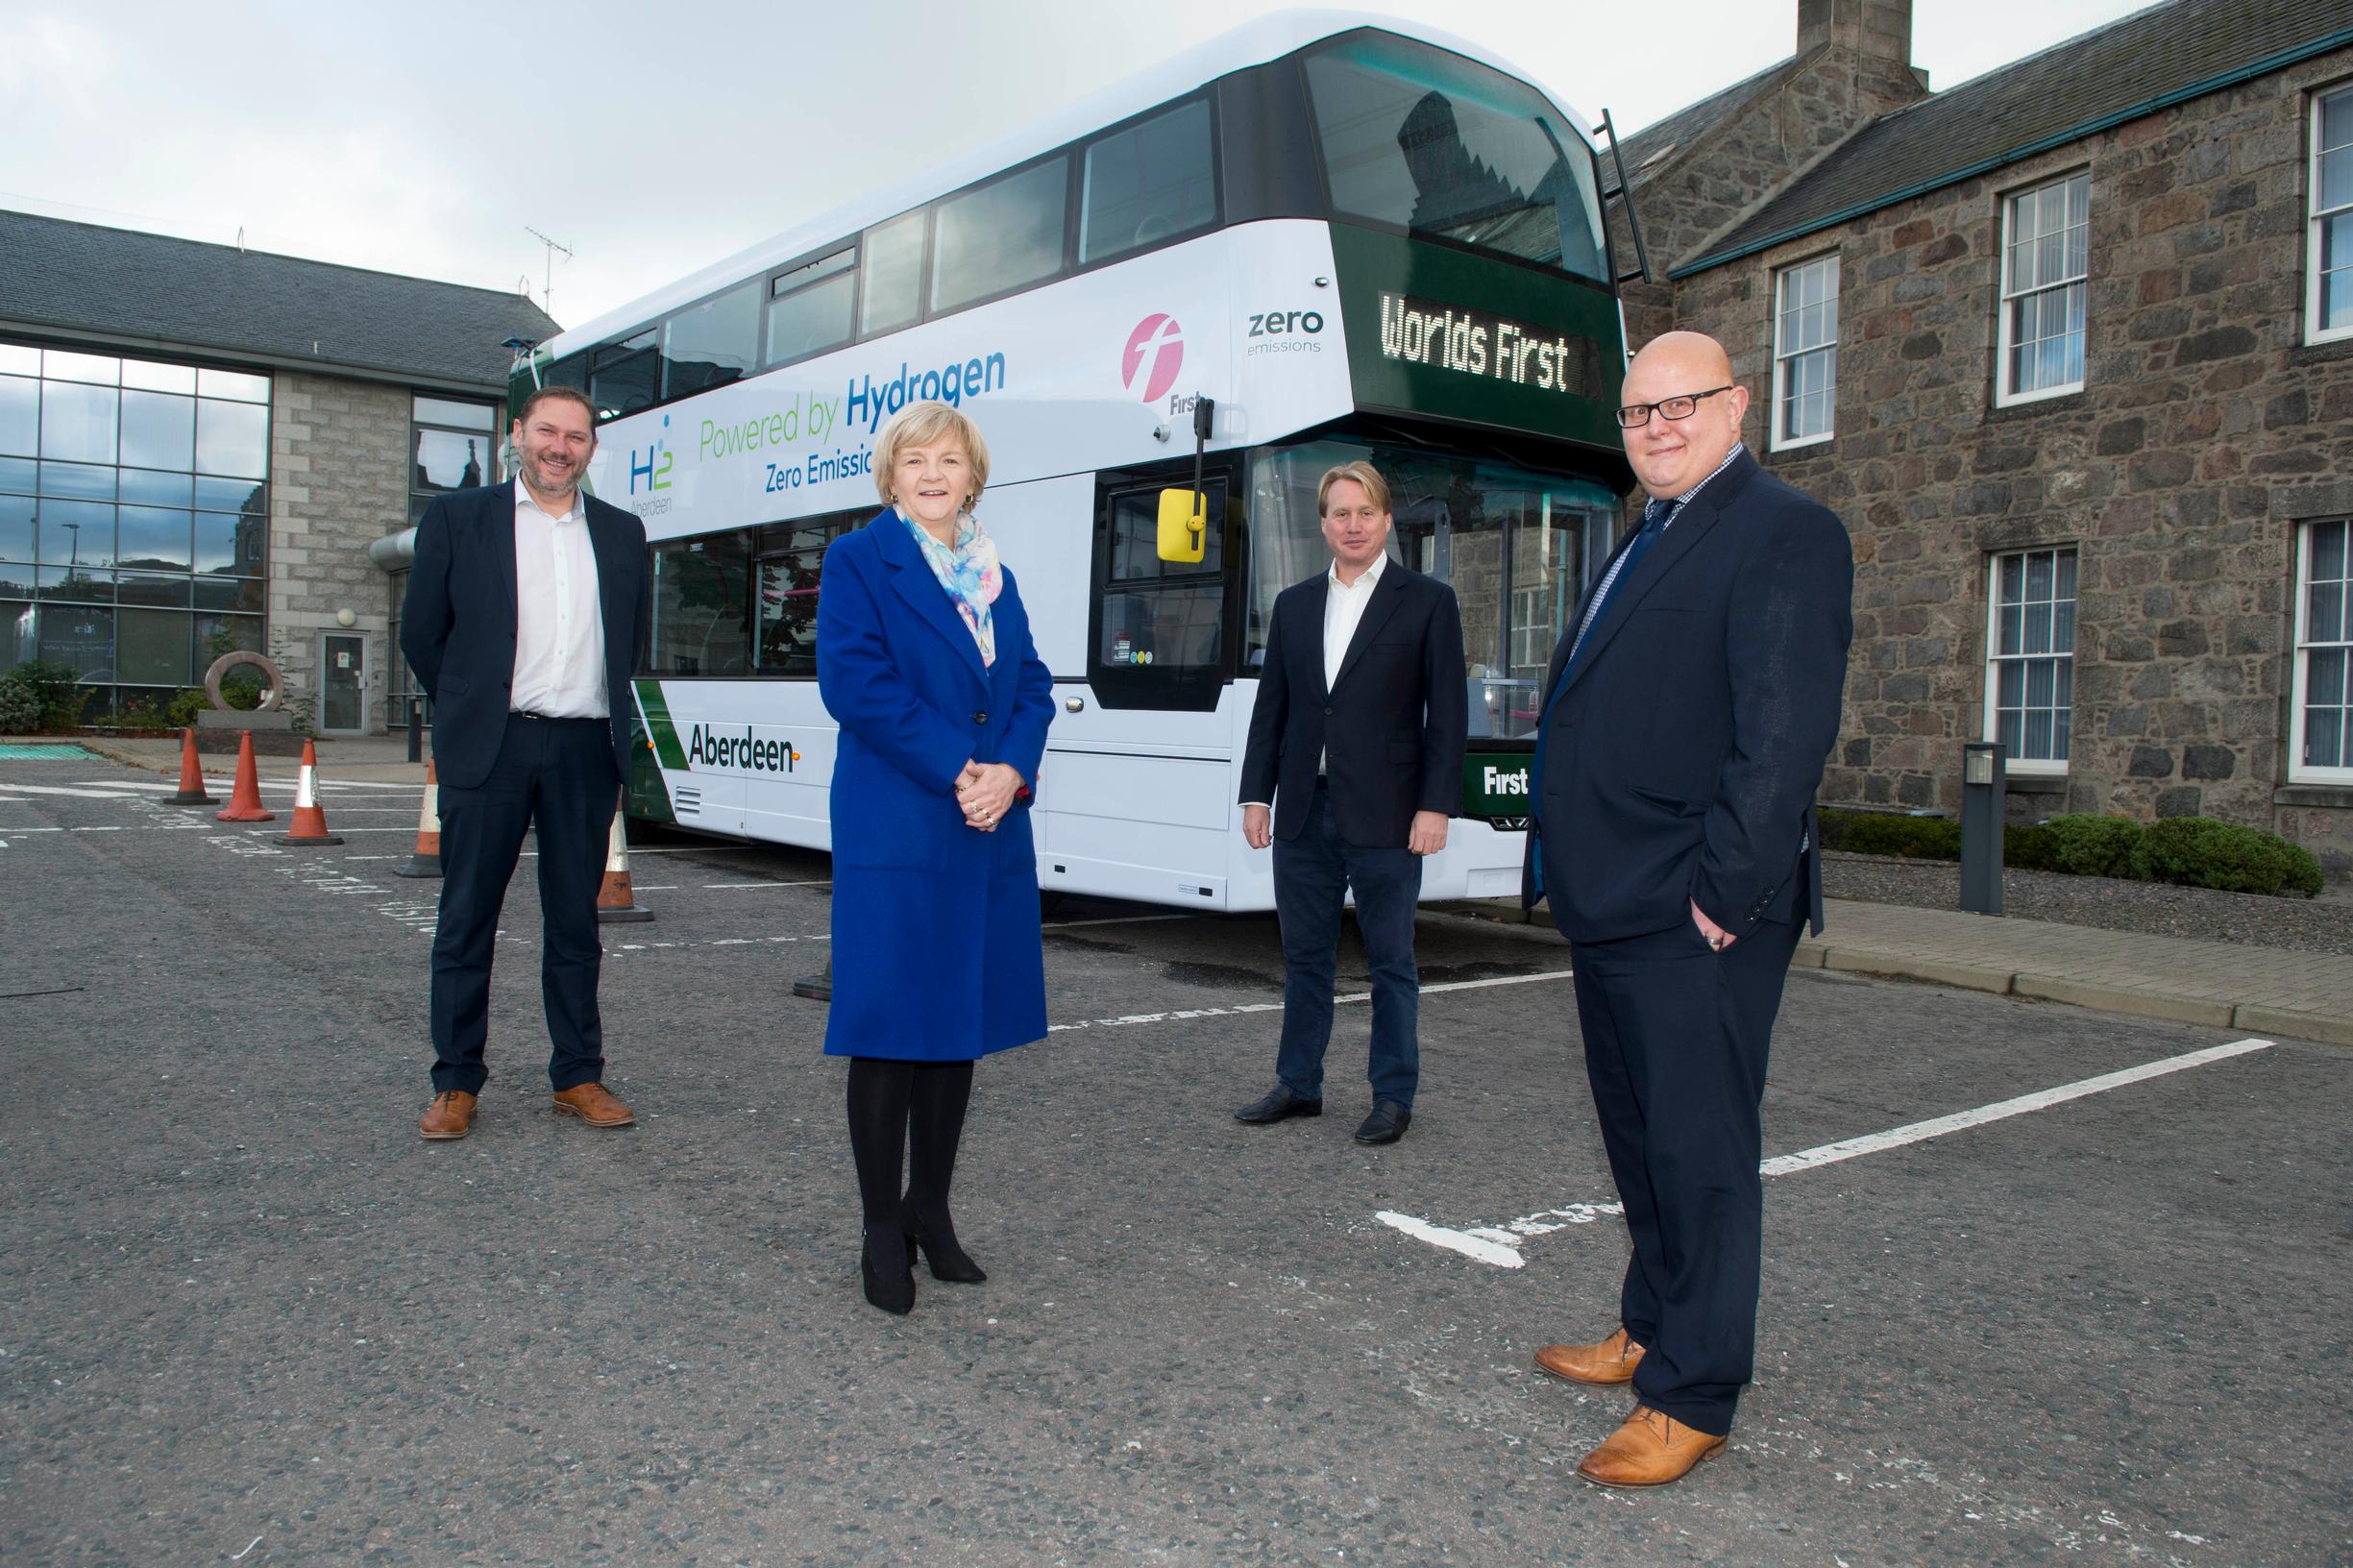 Left to right: Aberdeen City Council co-leaders Douglas Lumsden and Jenny Laing, Bamford Bus Company owner and executive chairman Jo Bamford, and First Aberdeen’s operations director David Phillips